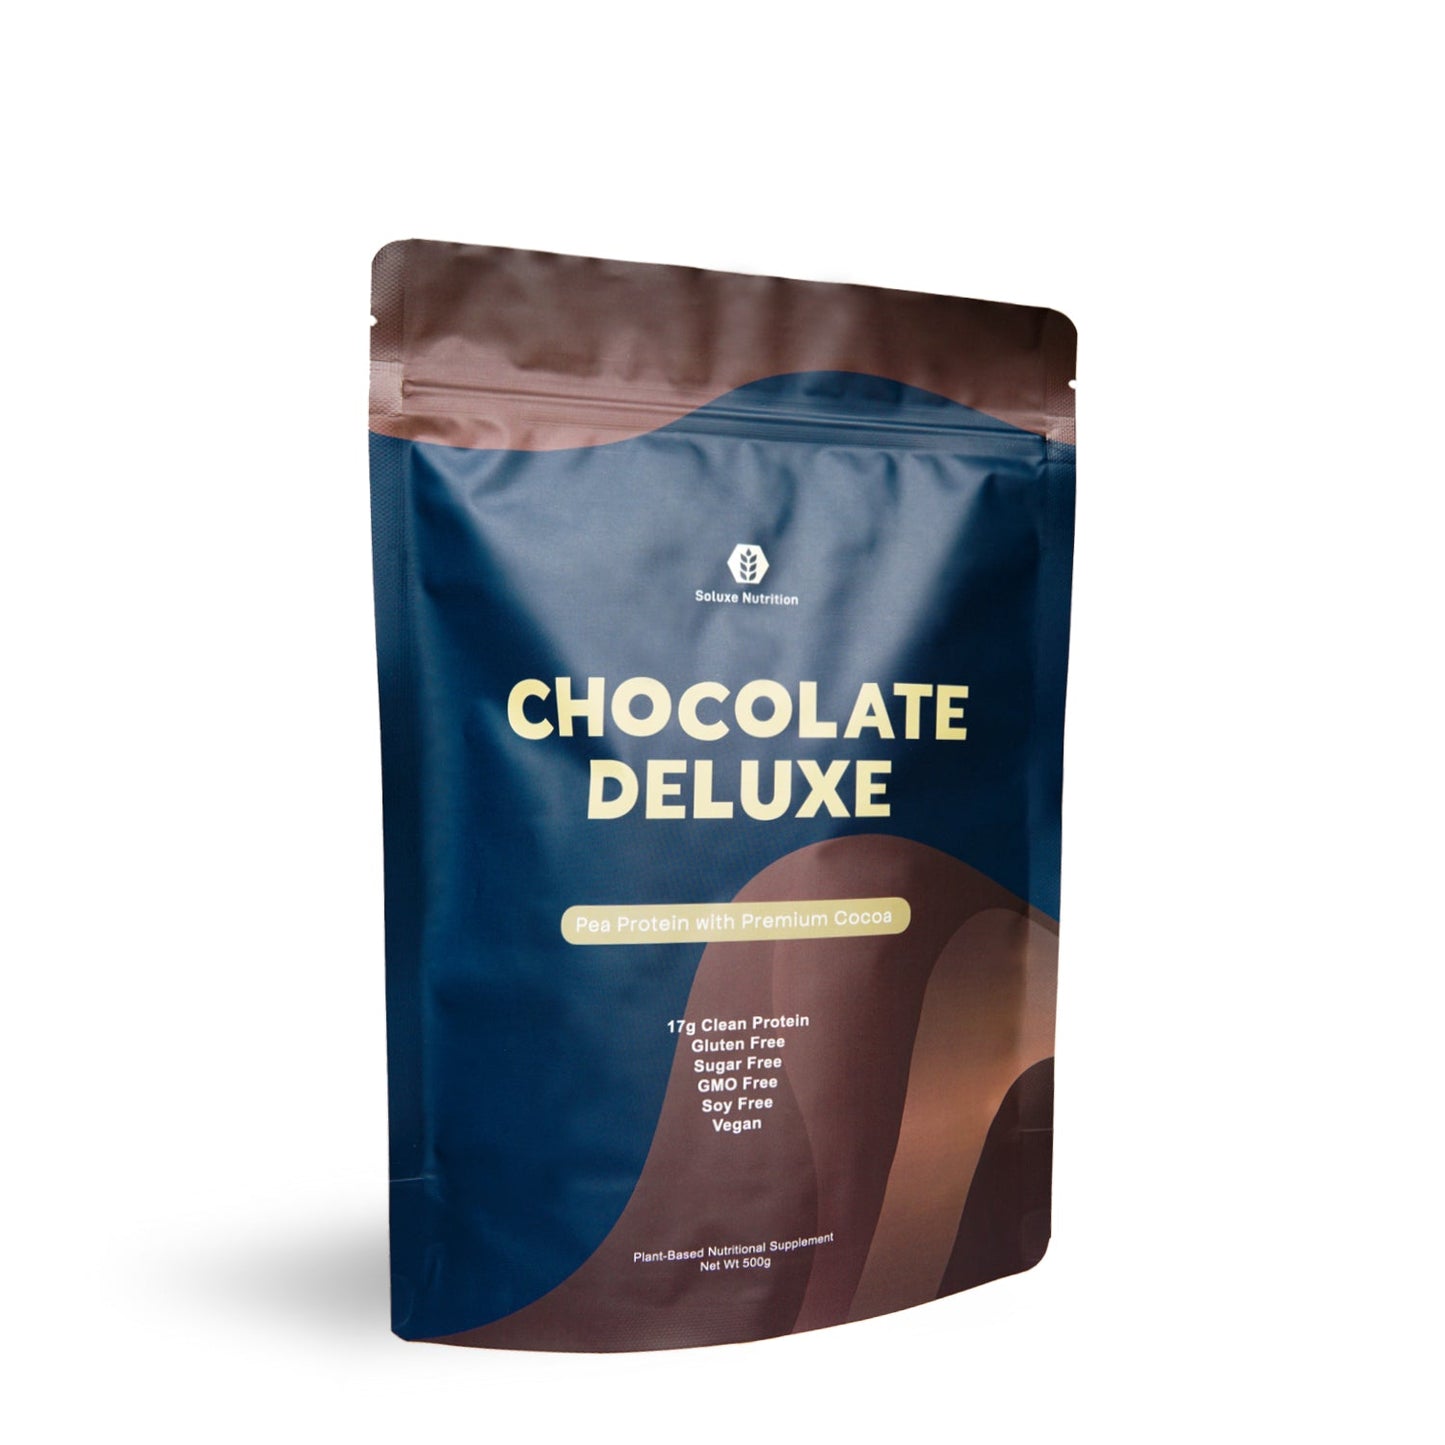 (Clearance) Pea Protein Isolate - Soluxe Chocolate Deluxe - (Short Expiry / Packaging Defect/ Old Packaging)